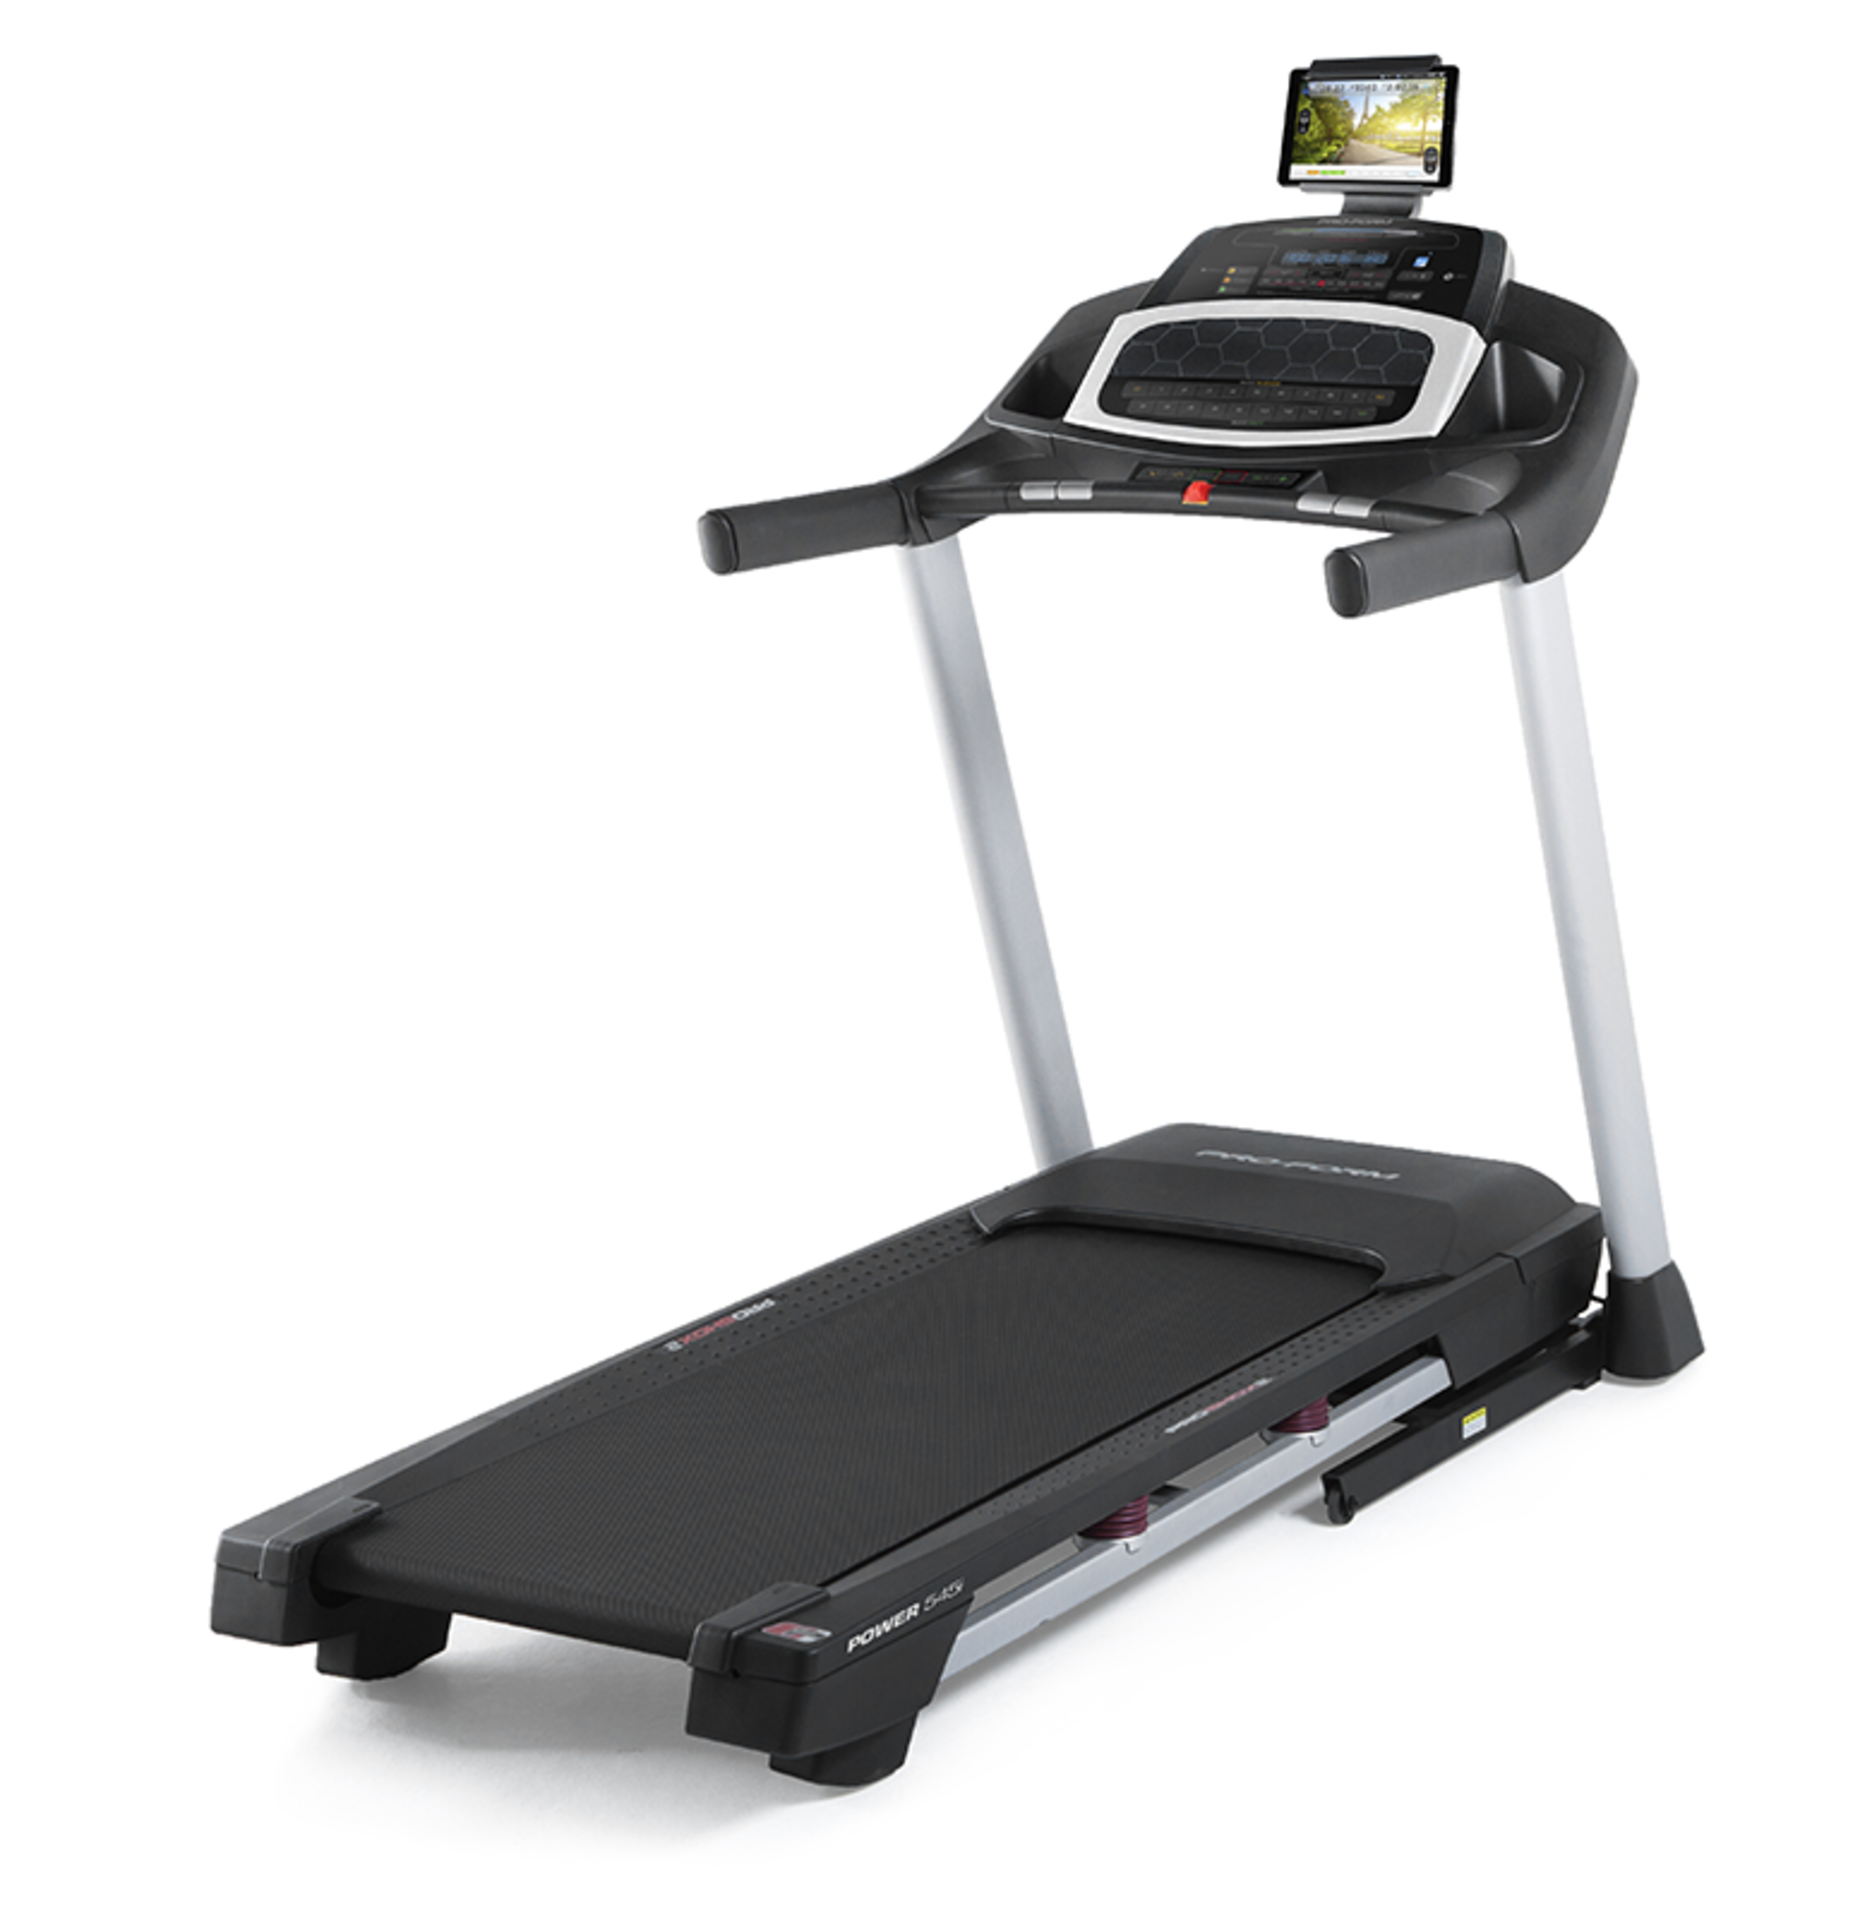 1 x Sweatband Proform Power 545i Treadmill BLACK/SILVER RRP œ789.00 This lot is a completely